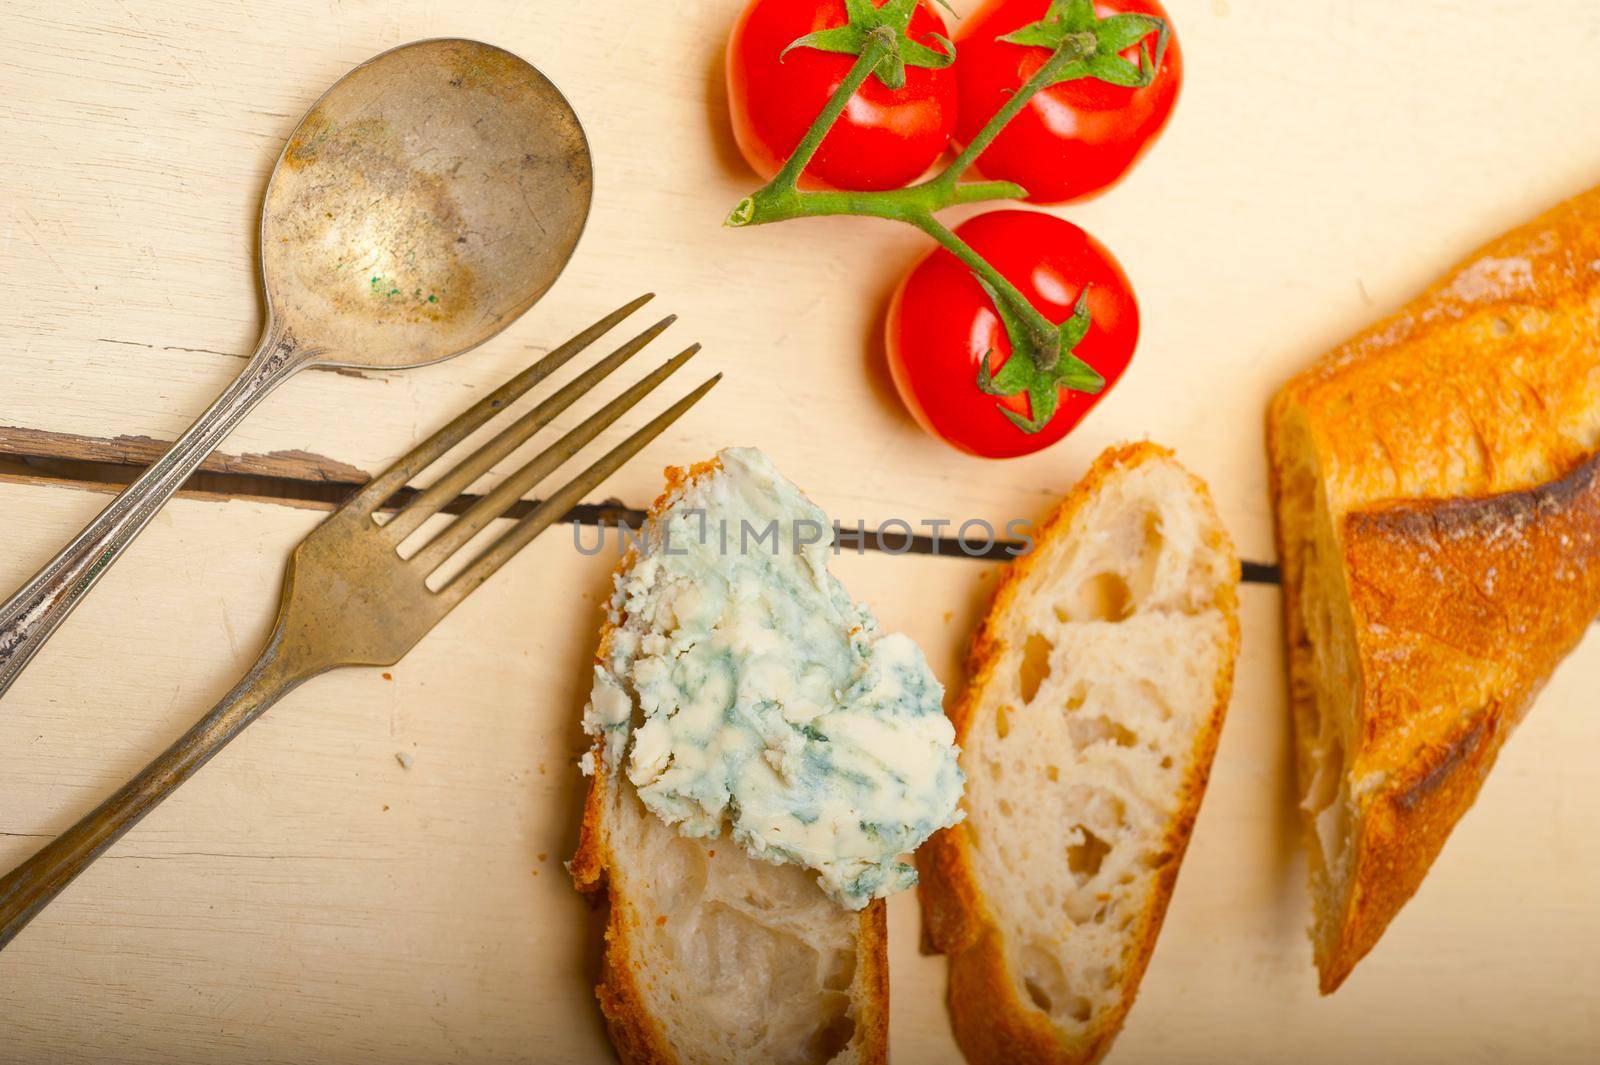 fresh blue cheese spread ove french baguette with cherry tomatoes on side